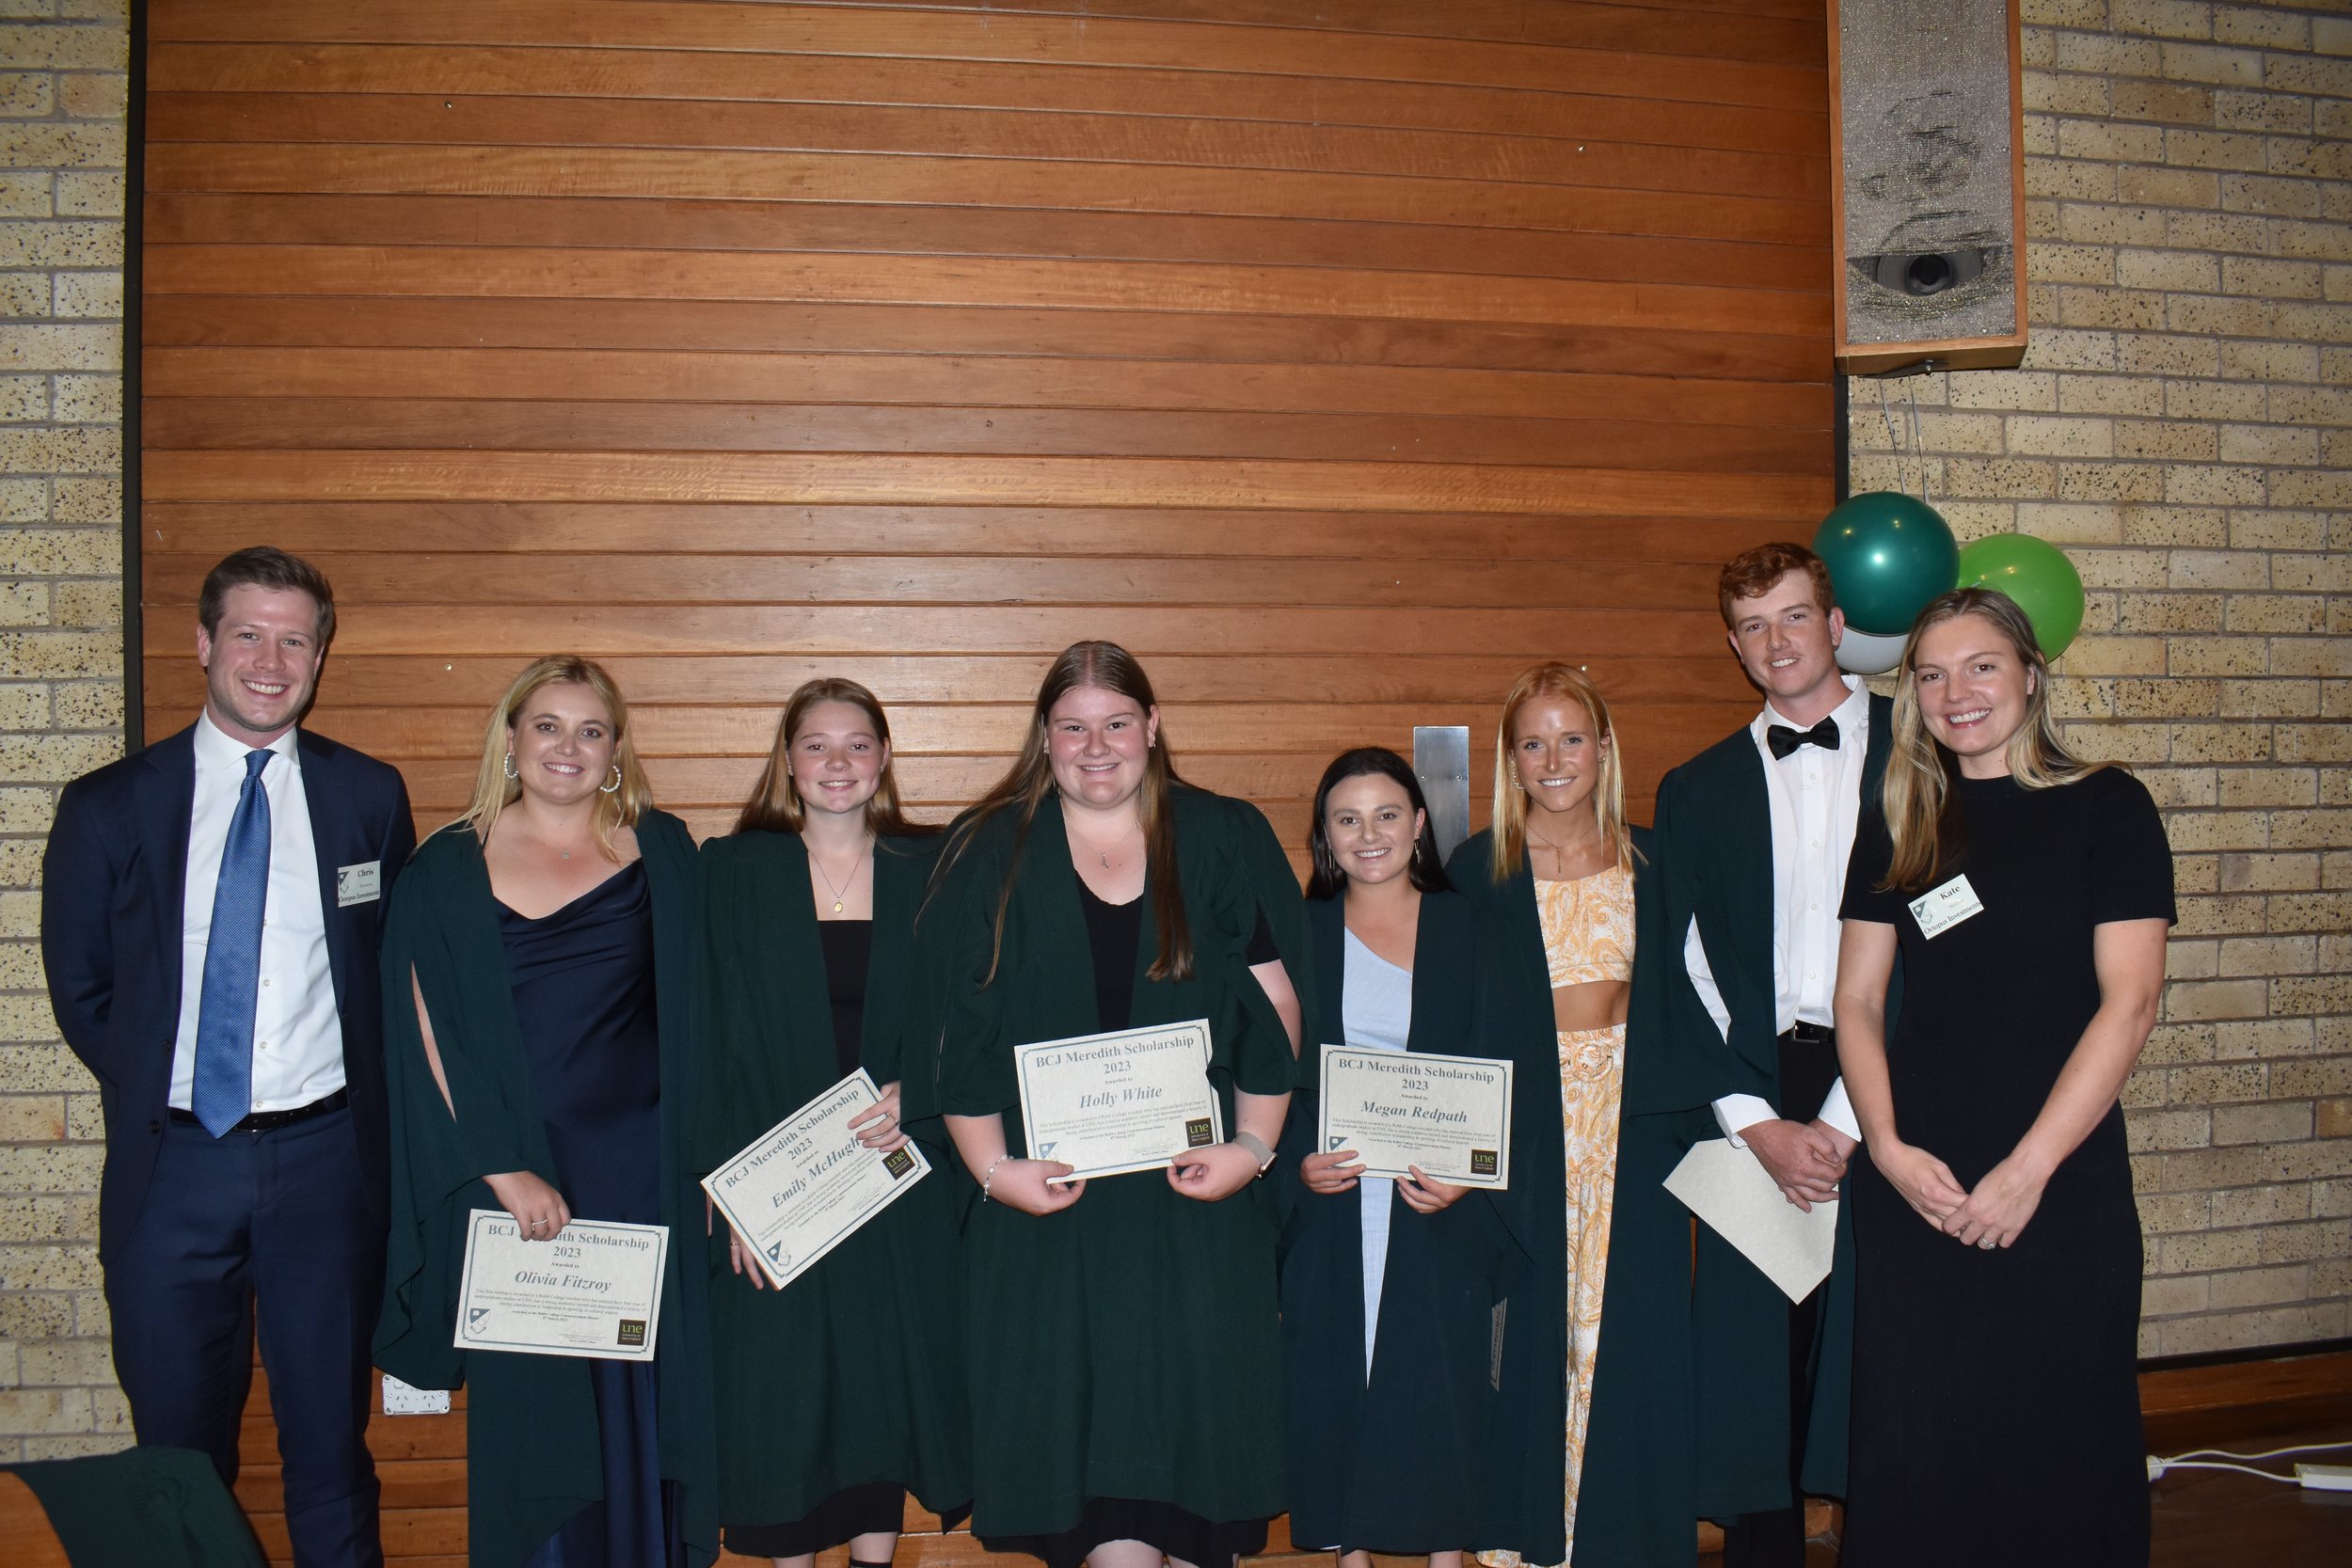 BCJ Meredith 1st Year scholarship presented by Kate McClure & Chris Rasmussen from Octopus Investments to Olivia Fitzroy, Emily McHugh, Megan Redpath, Holly White, Sigourney Berkery, Max Webber.